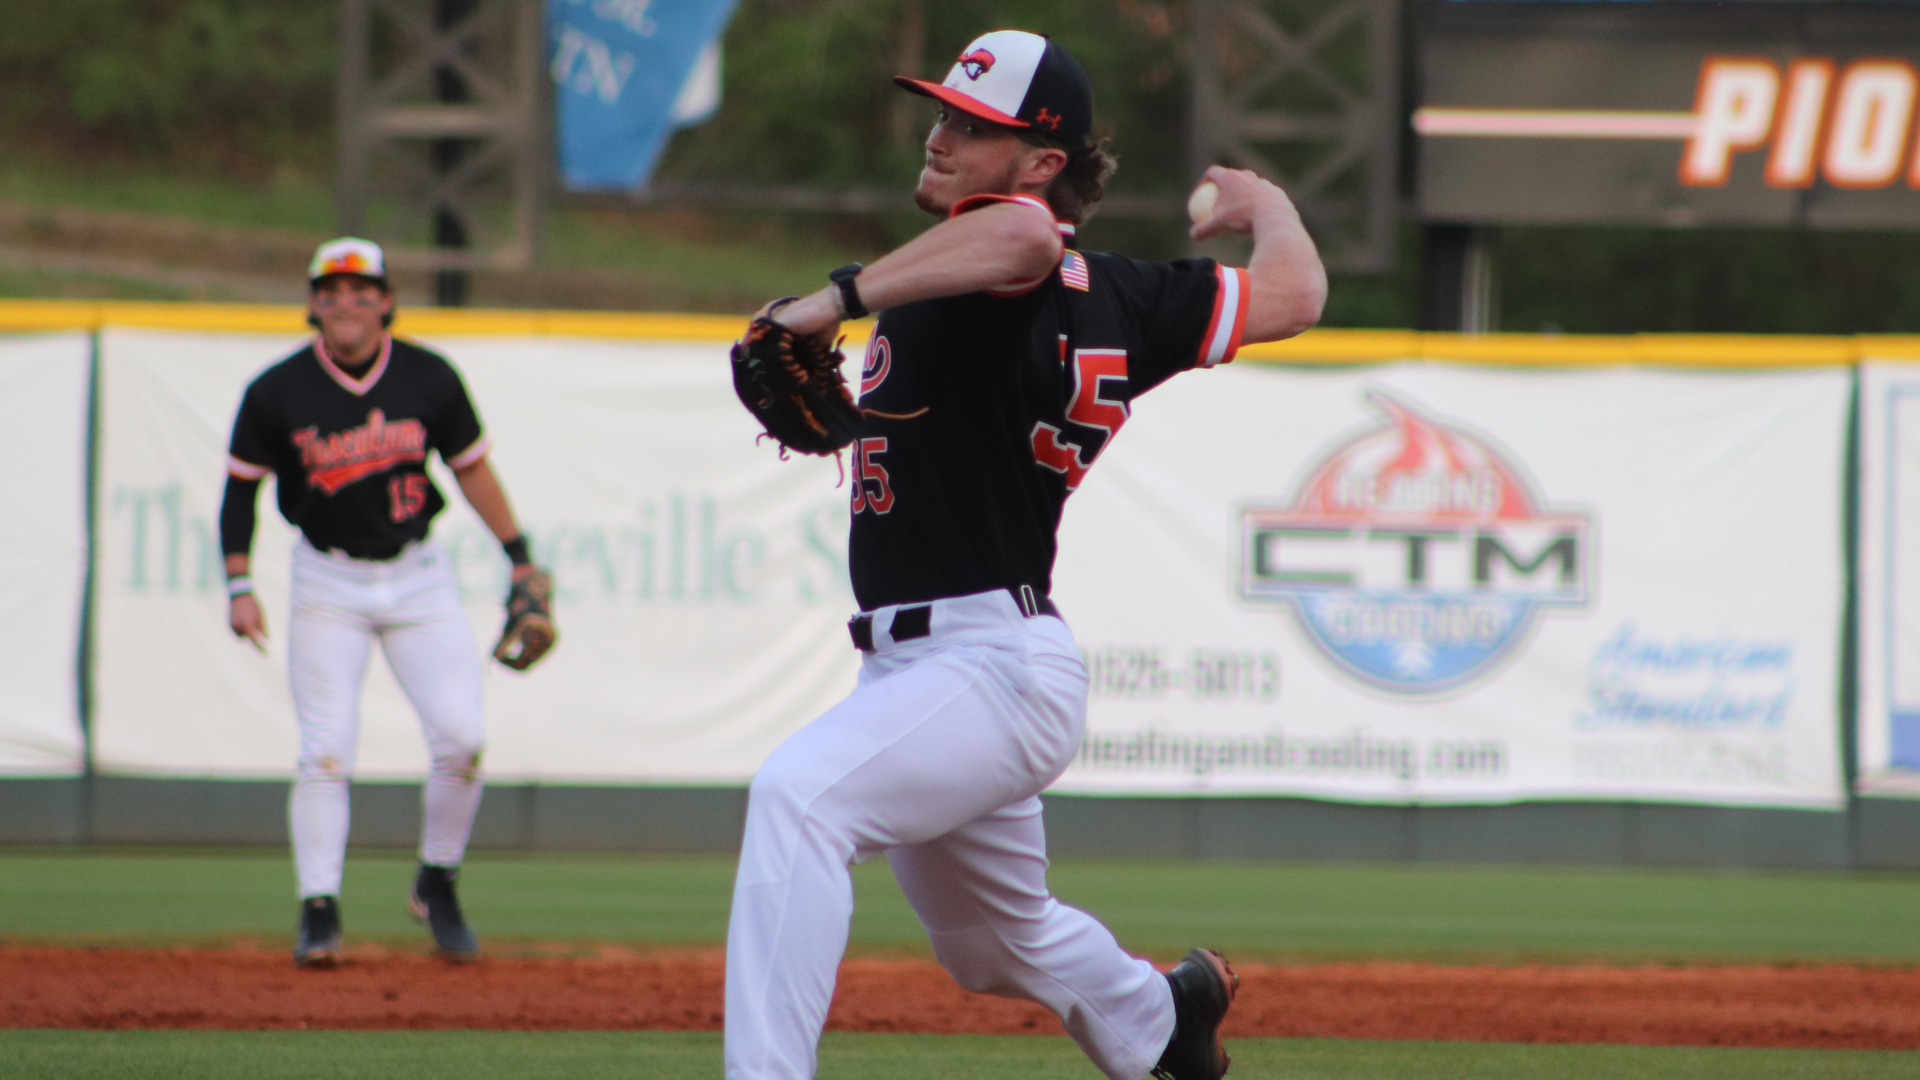 Luke Maicon pitched four strong innings to record the victory in Tusculum's 6-4 win over No. 15 Lee (photo by Connor Keating)